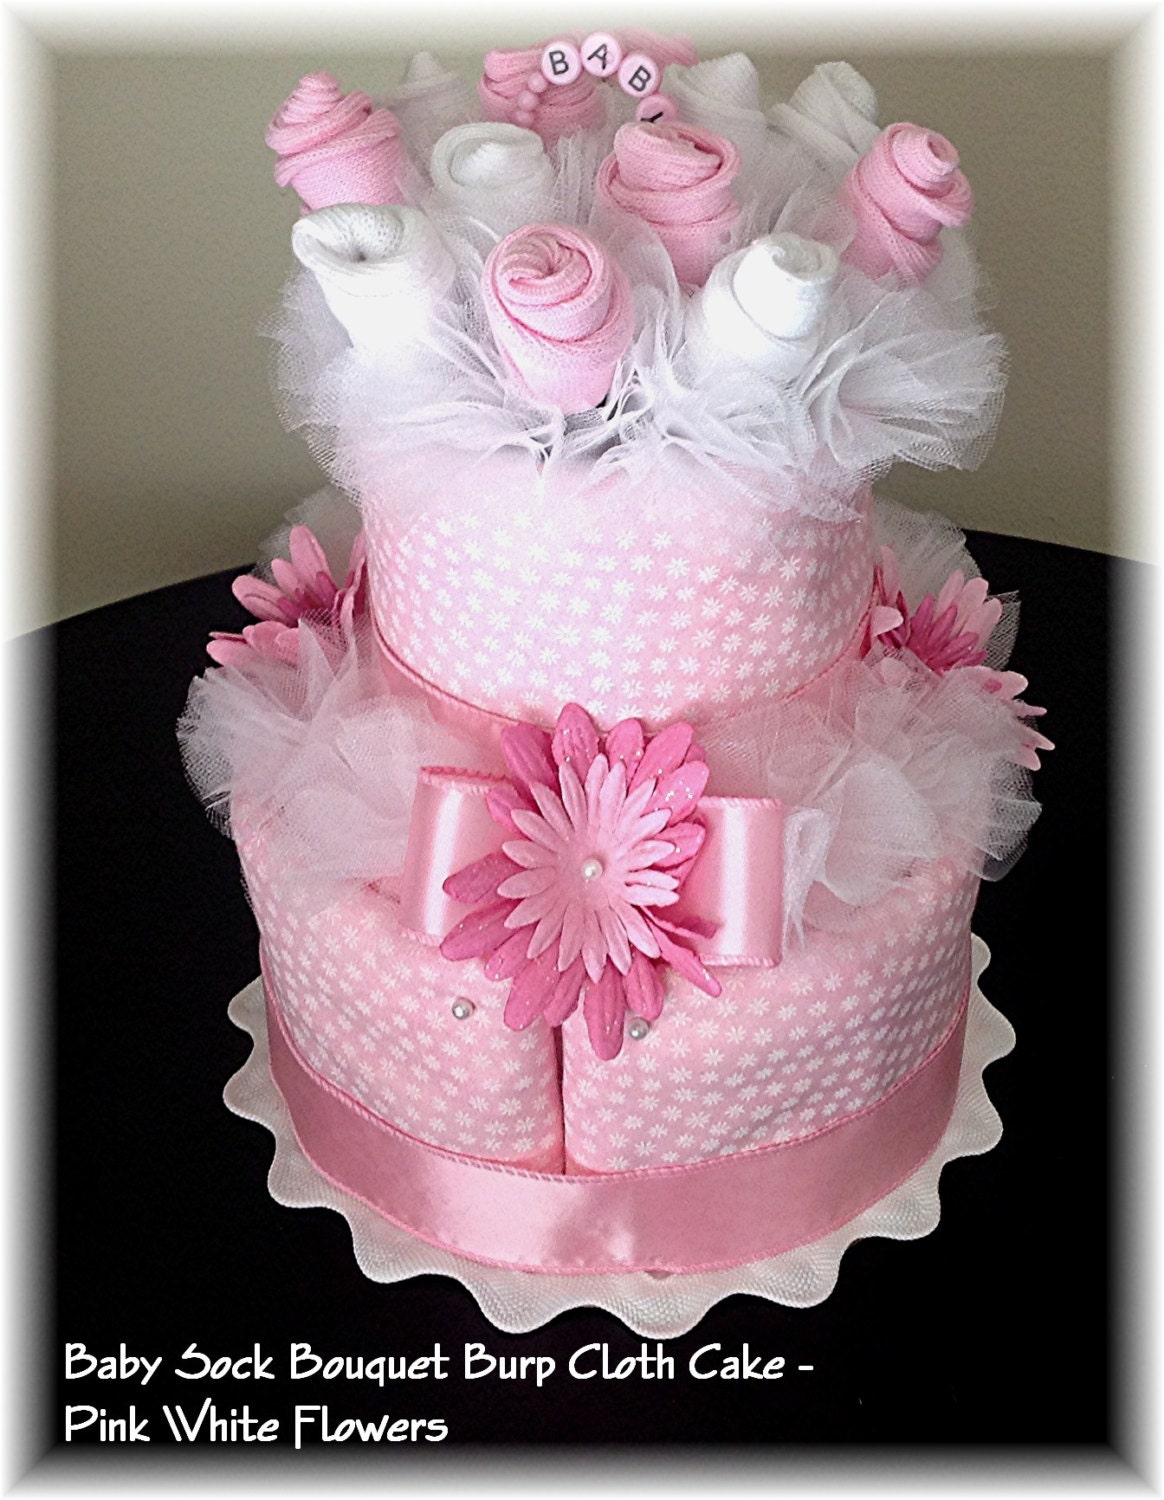 2 Tier Baby Sock Bouquet Burp Cloth Cake Pink White Flowers